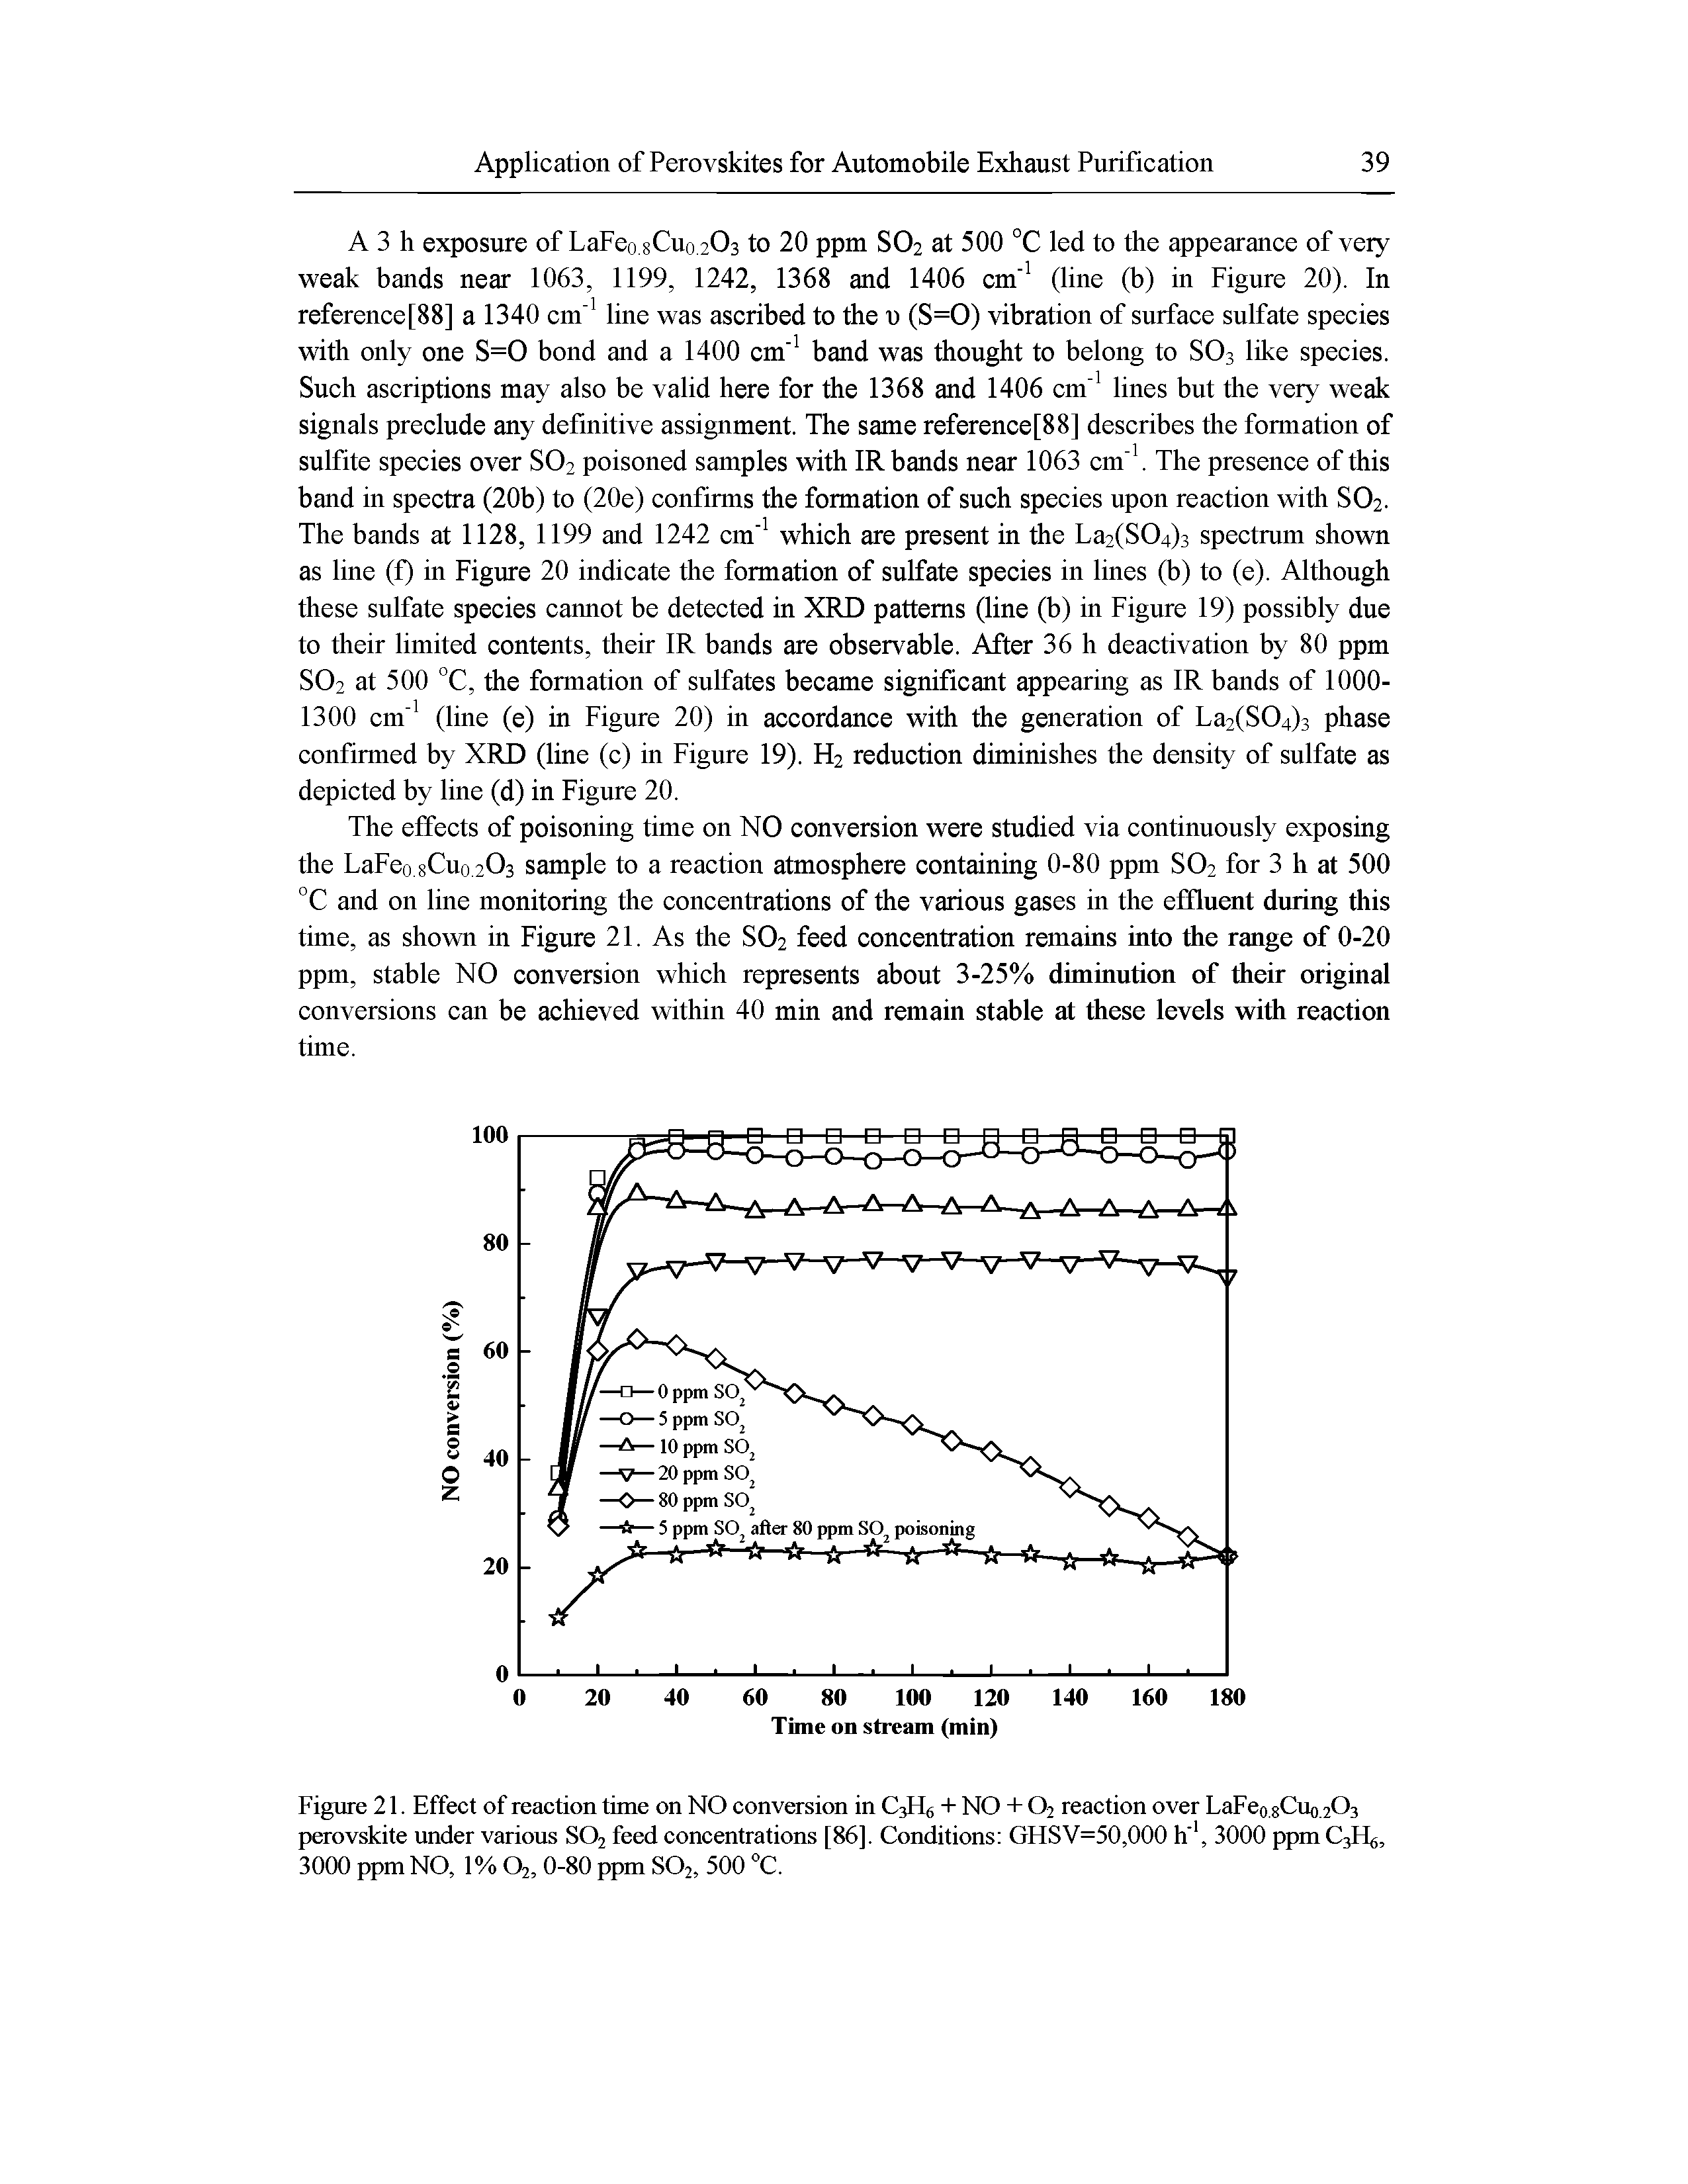 Figure 21. Effect of reaction time on NO conversion in CsHg + NO + O2 reaction over LaFco 8CU0.2O3 perovskite under various SO2 feed concentrations [86]. Conditions GHSV=50,000 h , 3000 ppm C3FL, 3000 ppm NO, 1% O2, 0-80 ppm SO2, 500 °C.